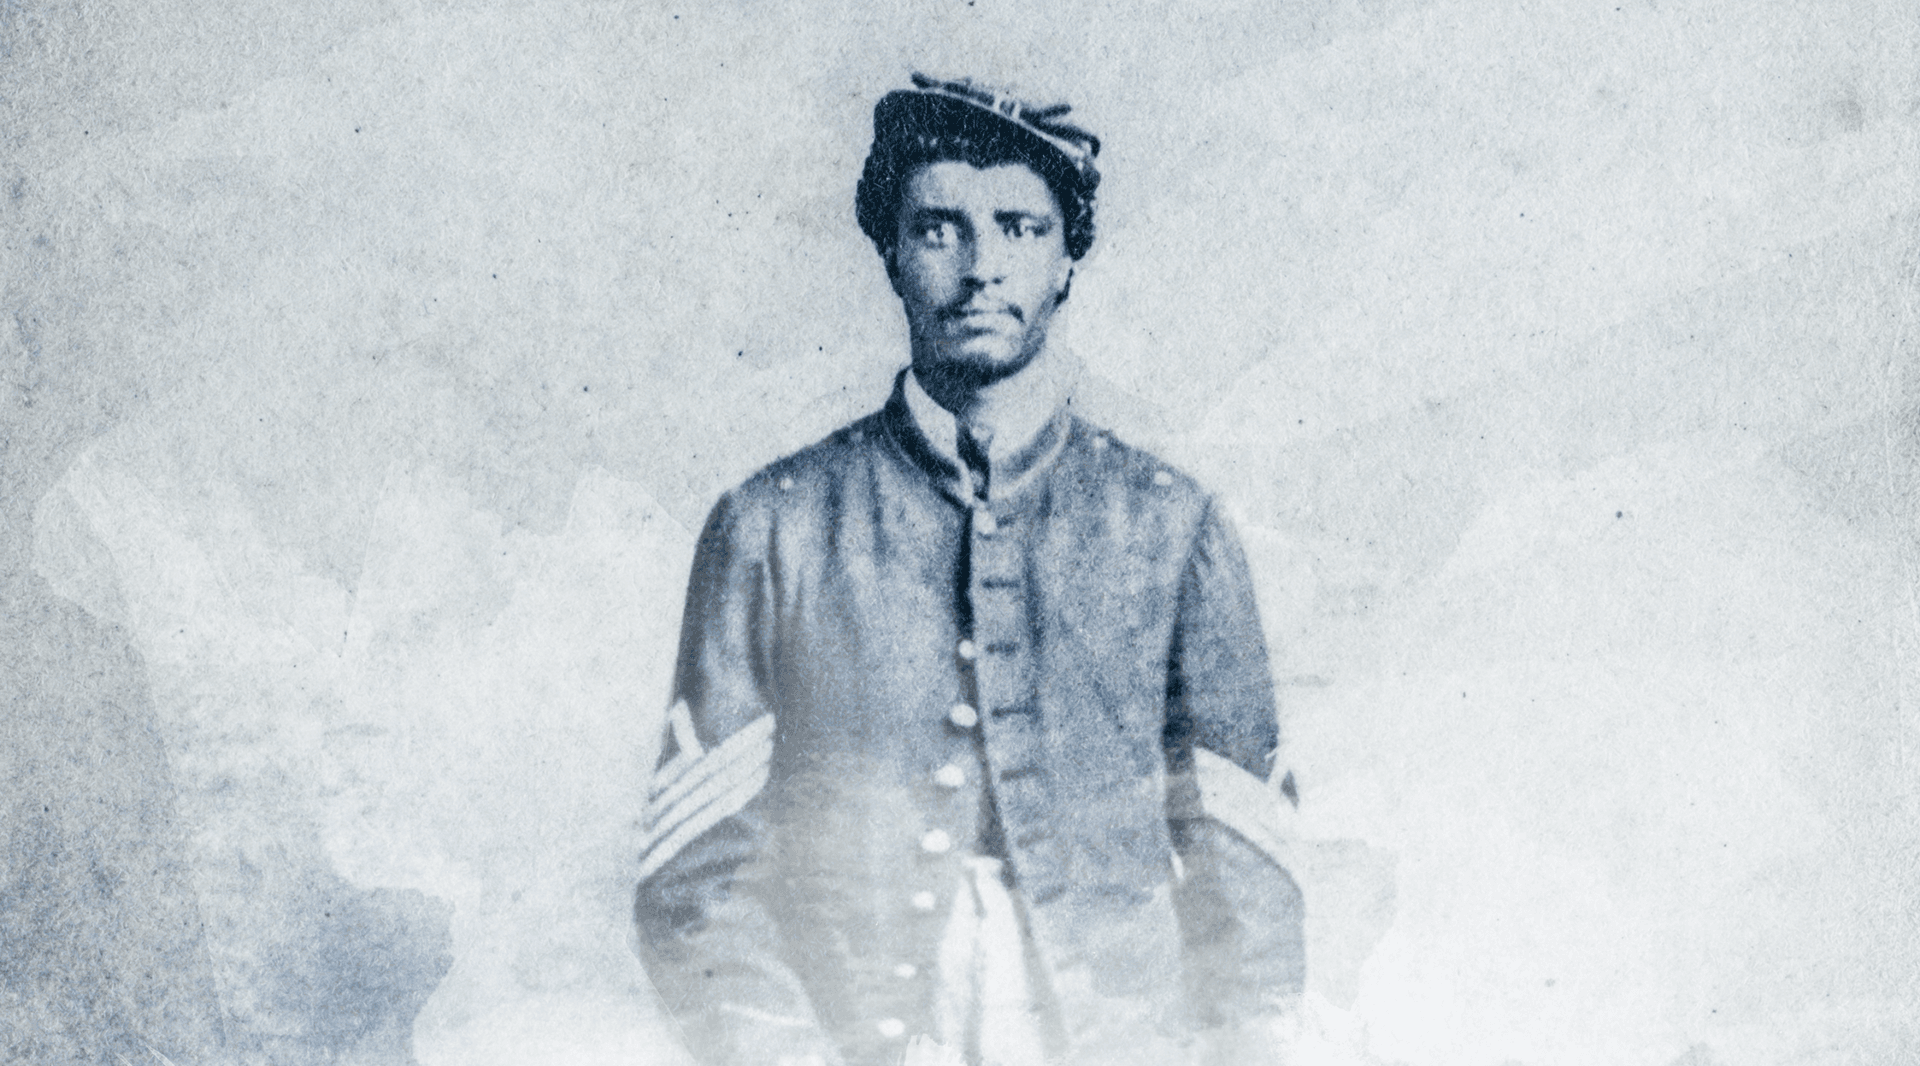 Blue, faded photograph of soldier in Civil War-era uniform and hat